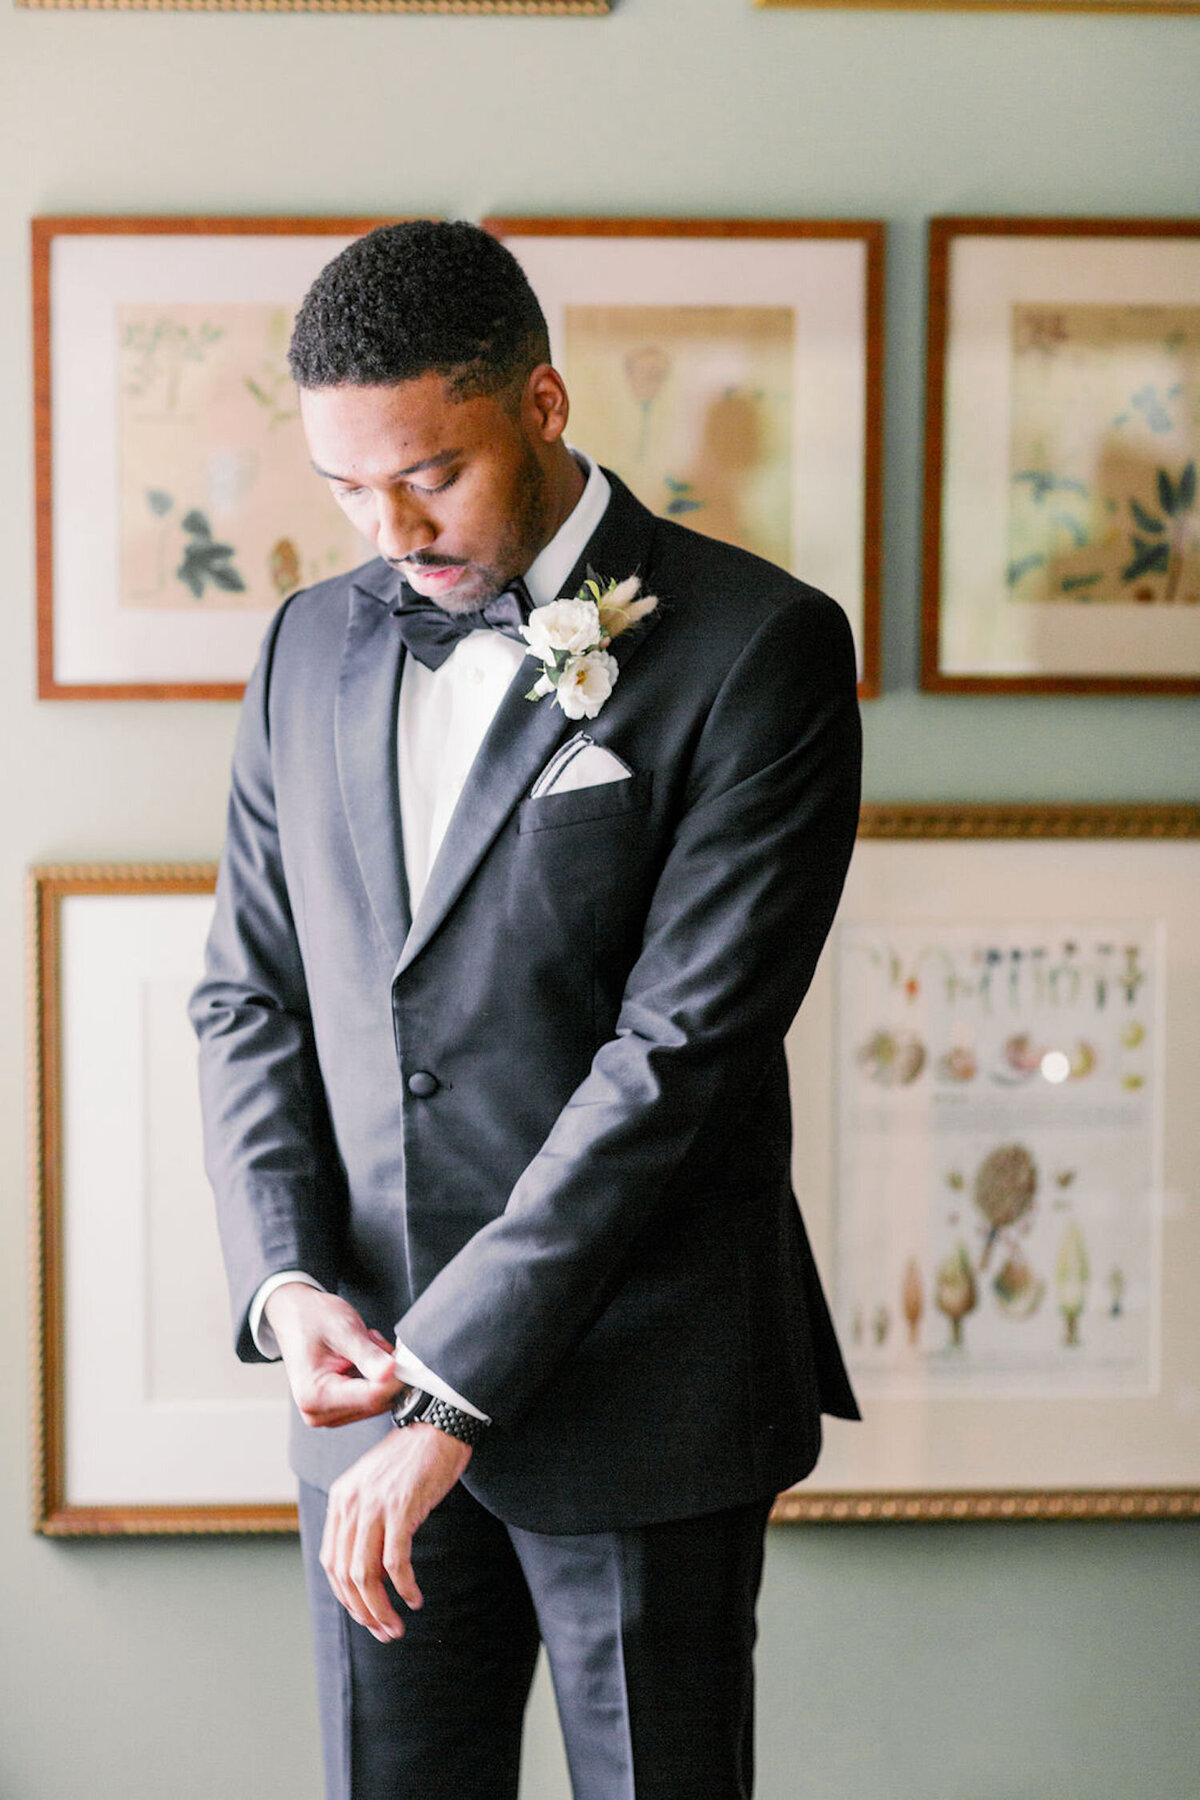 Groom getting ready at Luxury Chicago North Shore Outdoor Wedding Venue